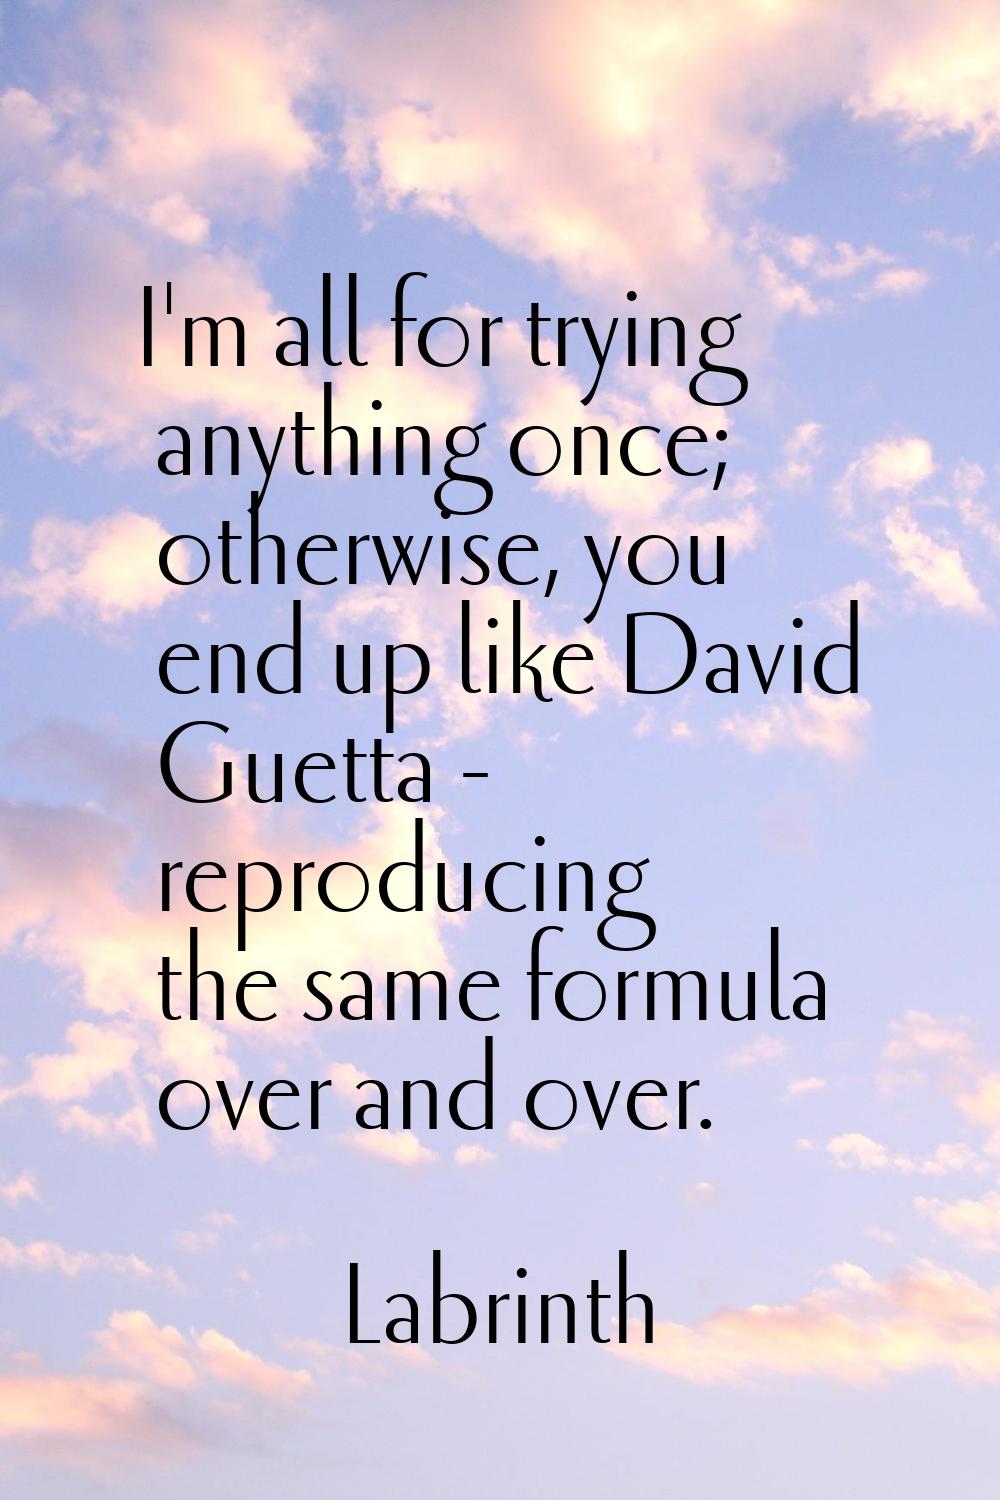 I'm all for trying anything once; otherwise, you end up like David Guetta - reproducing the same fo